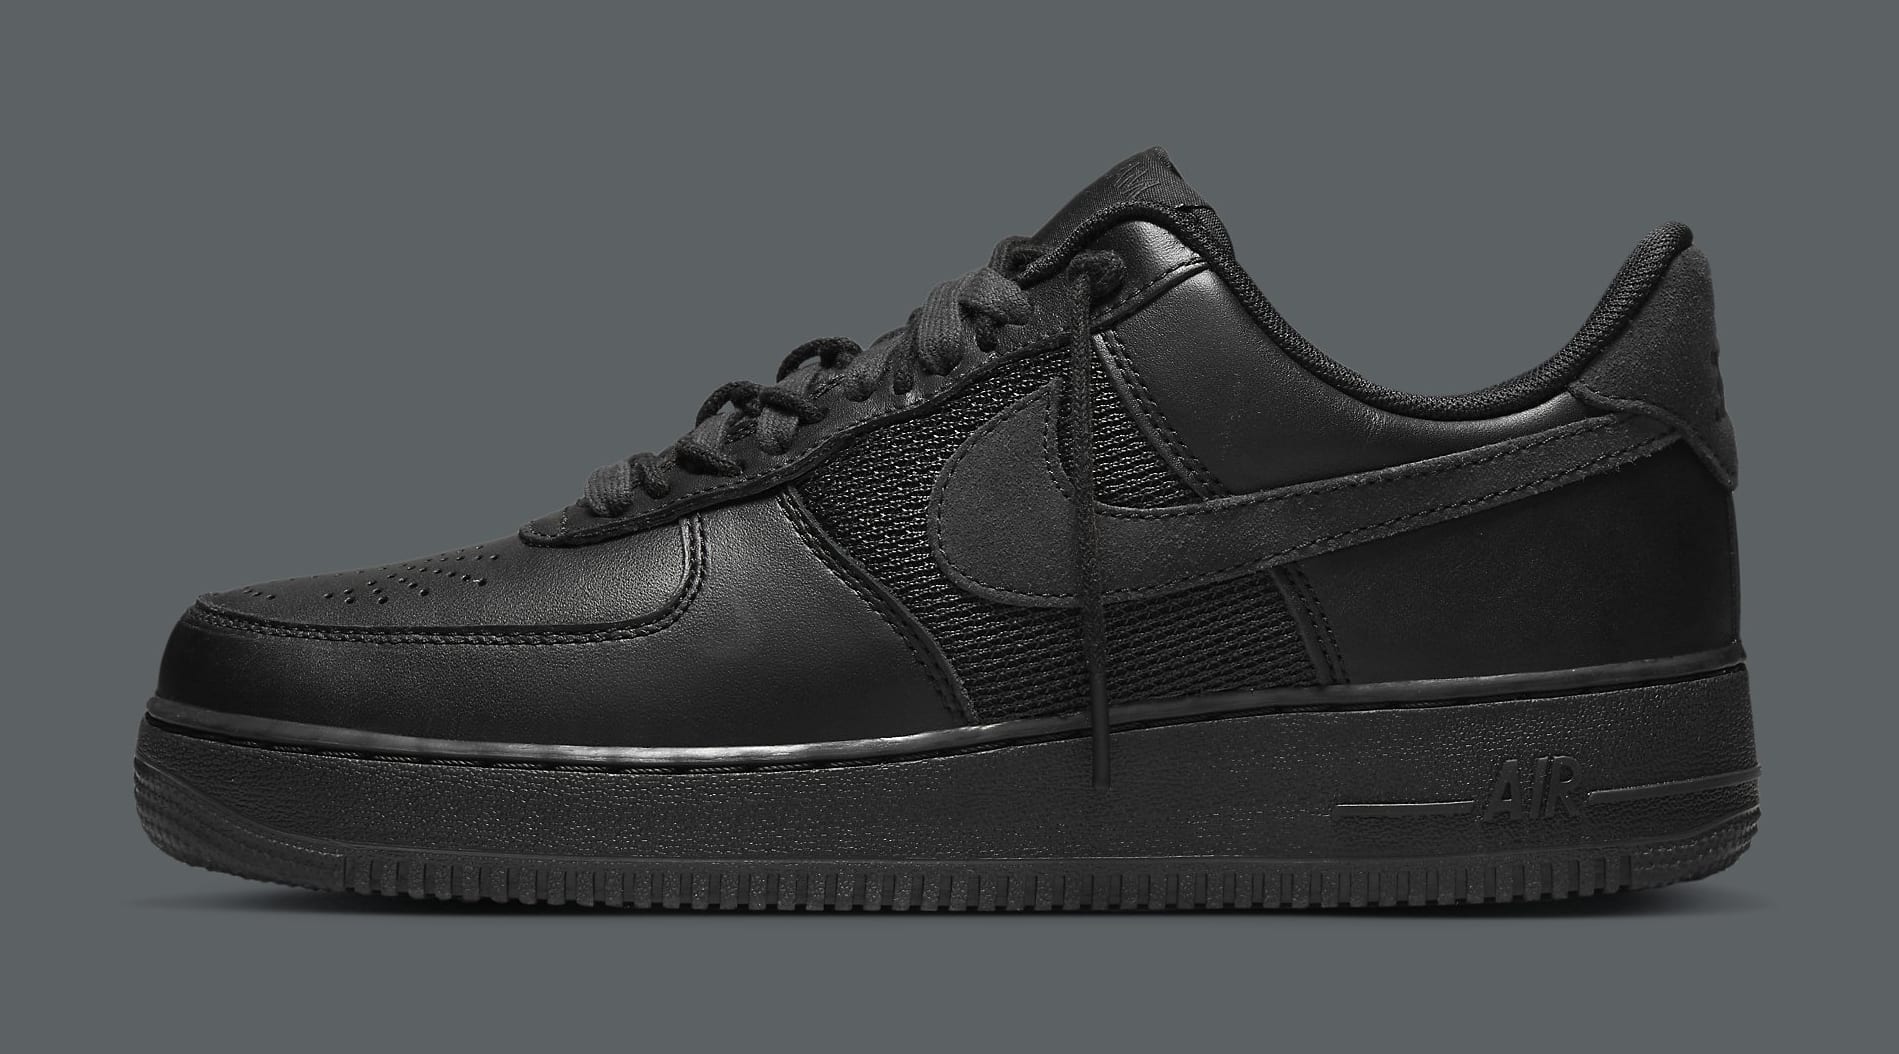 Slam Jam x Nike Air Force 1 Low 'Black' DX5590 001 Lateral